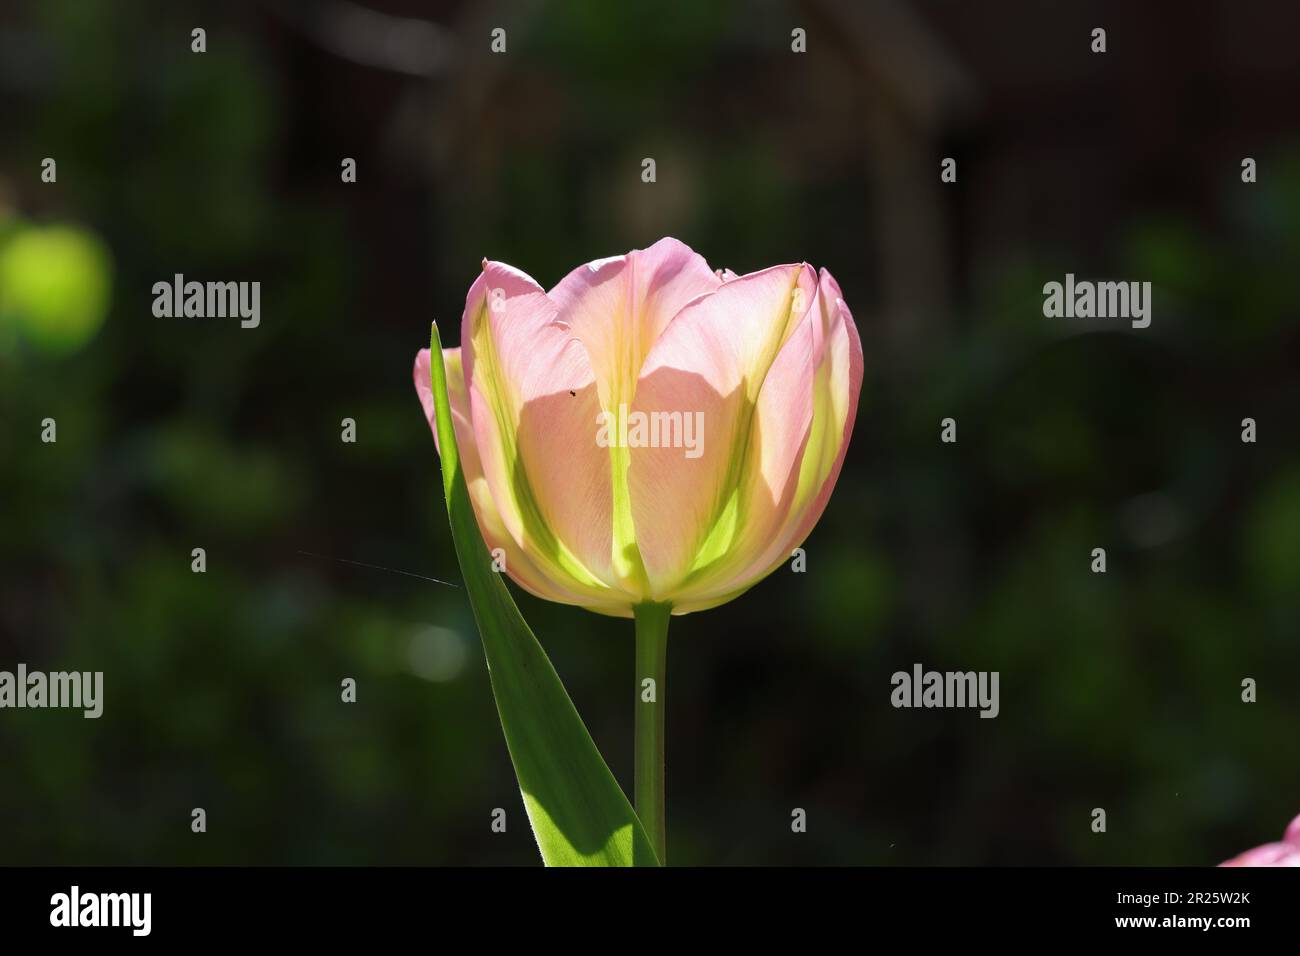 close-up of a sunlit pink and green colored viridiflora tulip  against a dark blurry background, Copy space Stock Photo